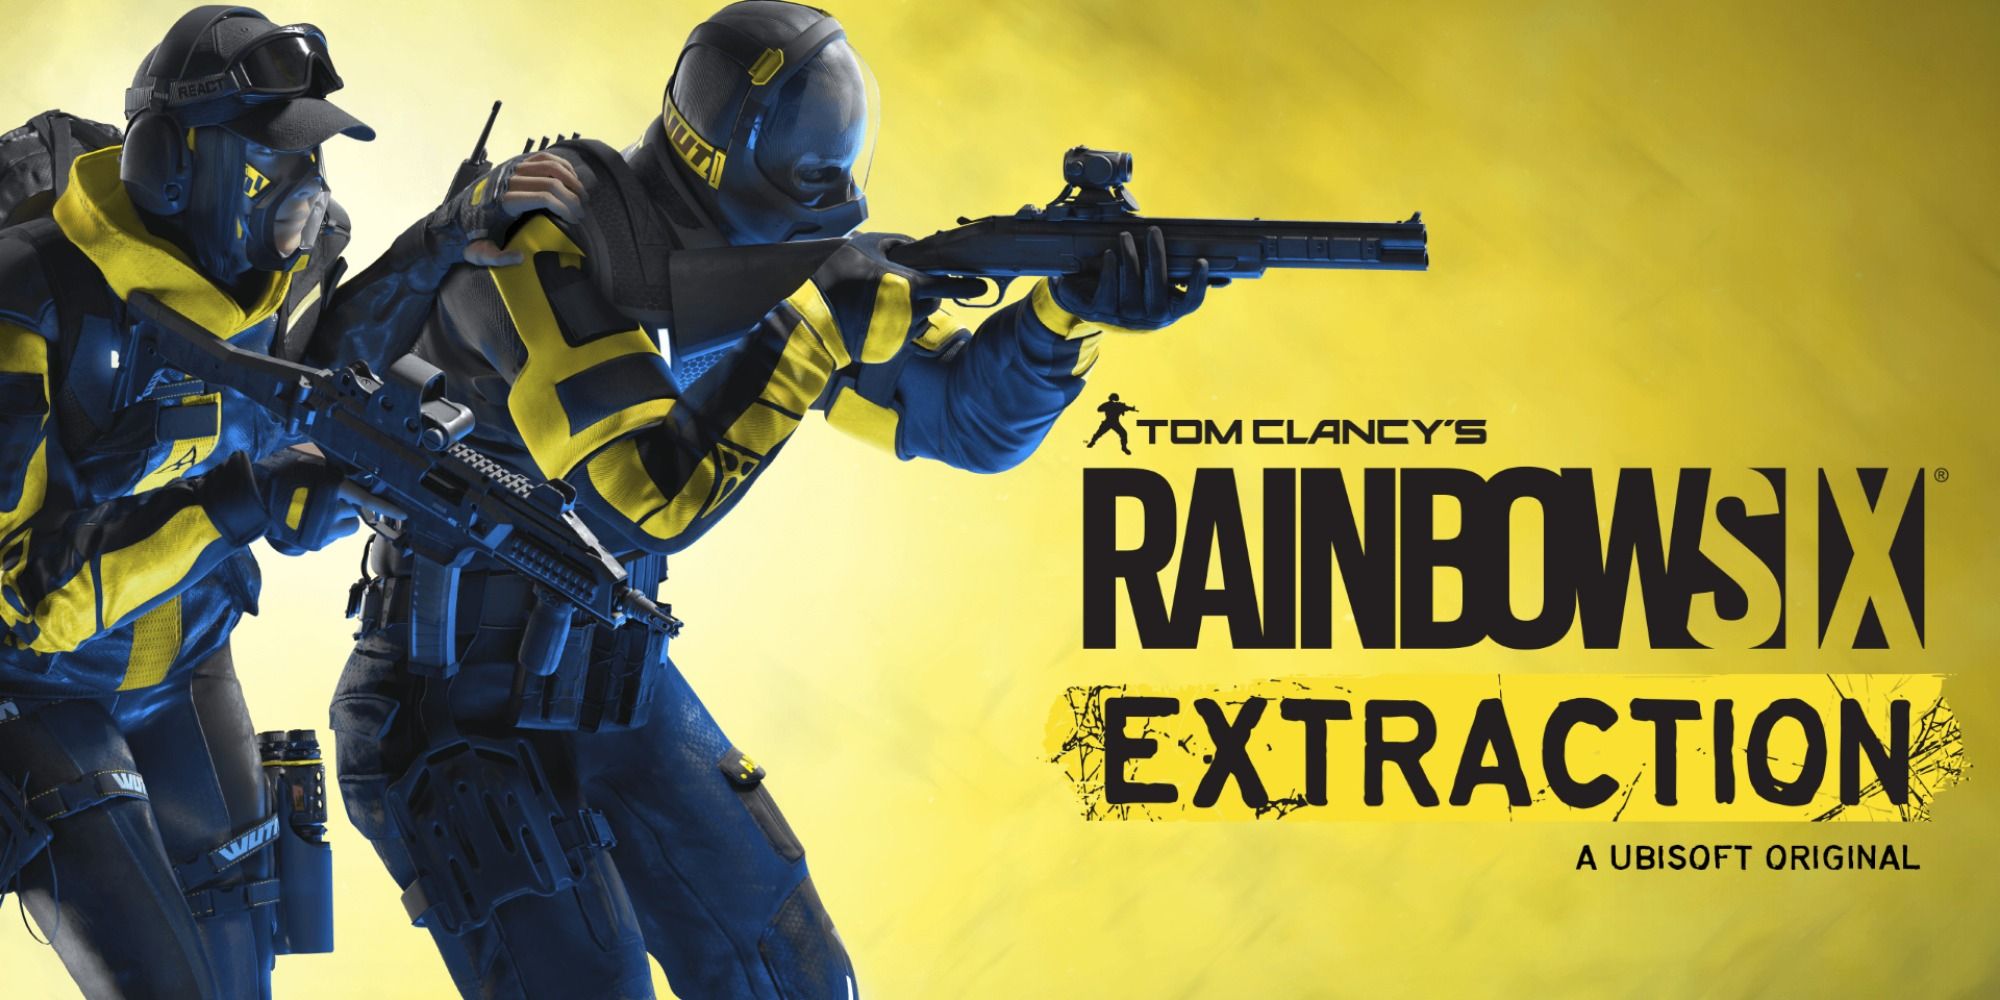 Title art for Rainbow Six Extraction with two armored teammates wielding weapons standing against a yellow background